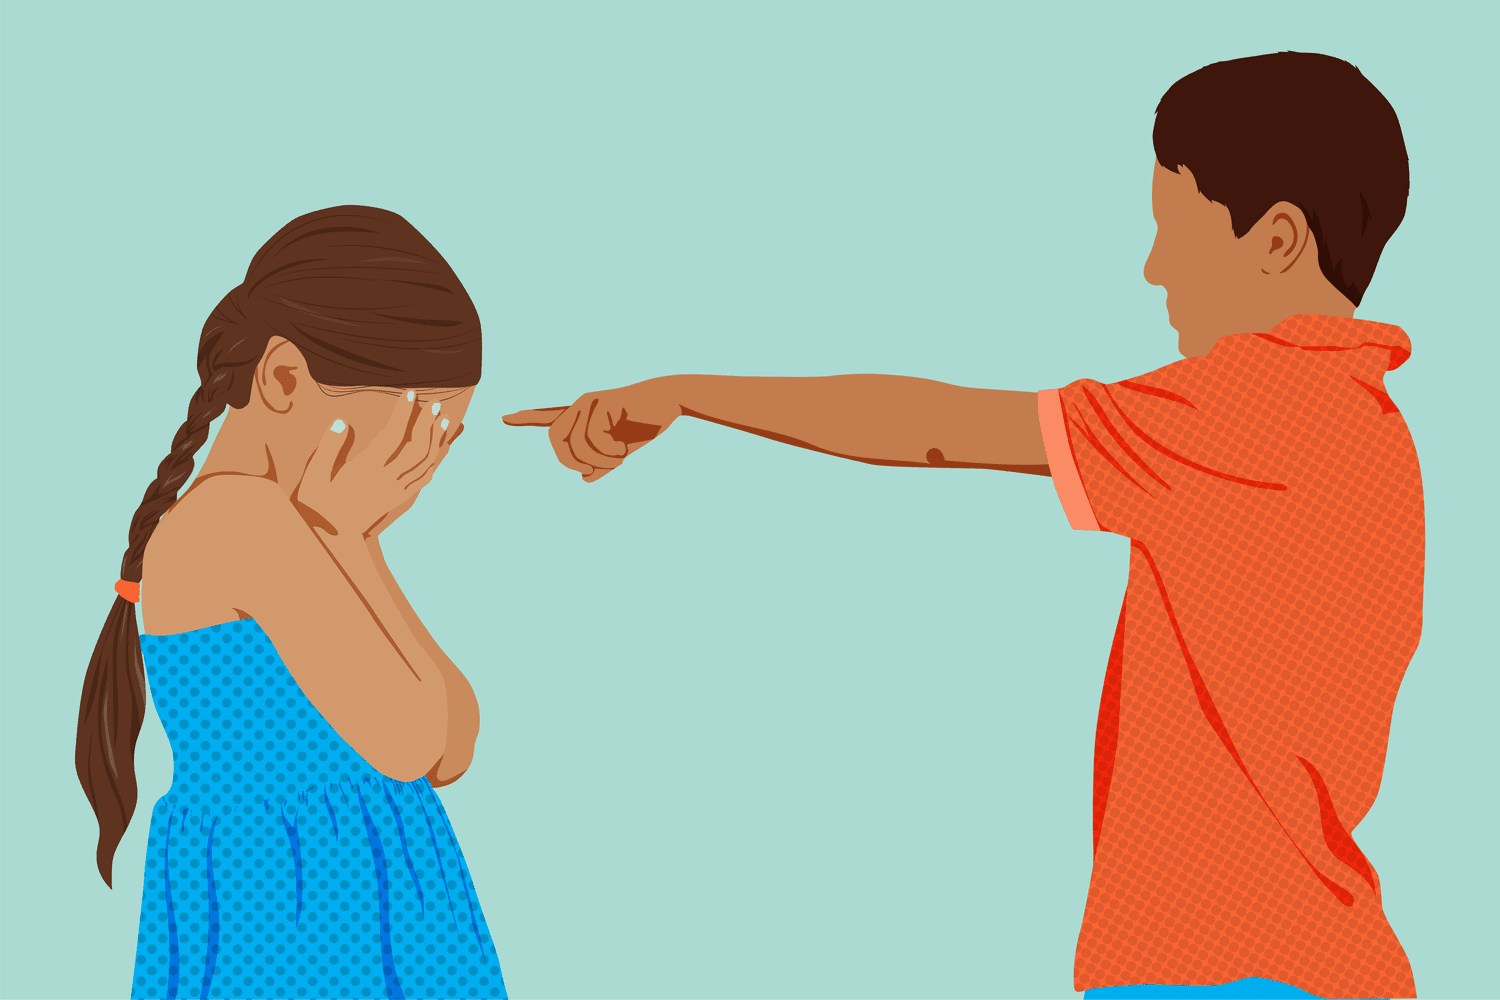 An illustration of a sister and brother.